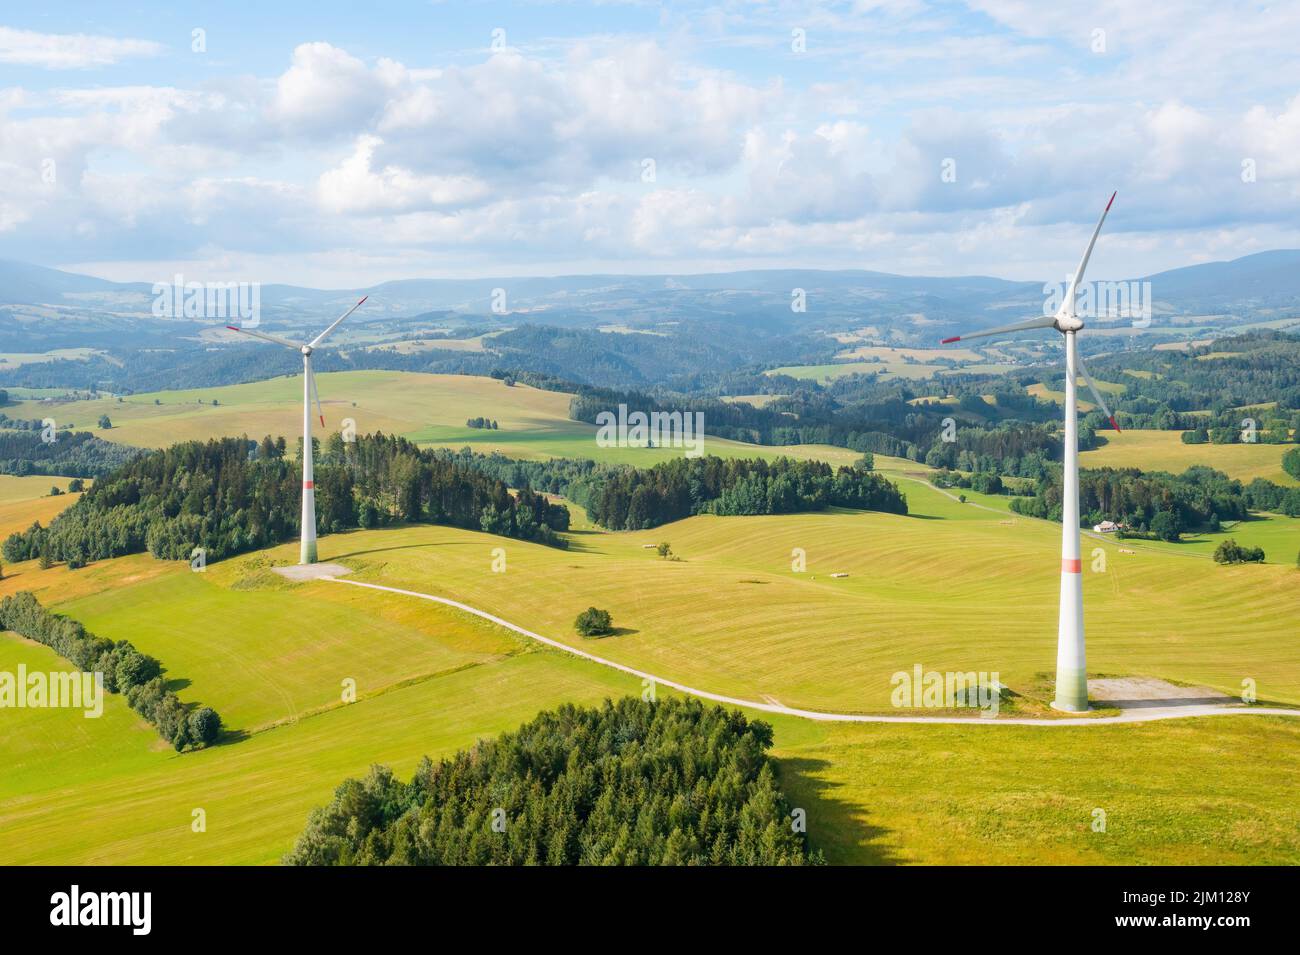 Panoramic view of windmills in the wind farm in the yellow field and mountains on the background. Production of green and renewable energy.  Stock Photo